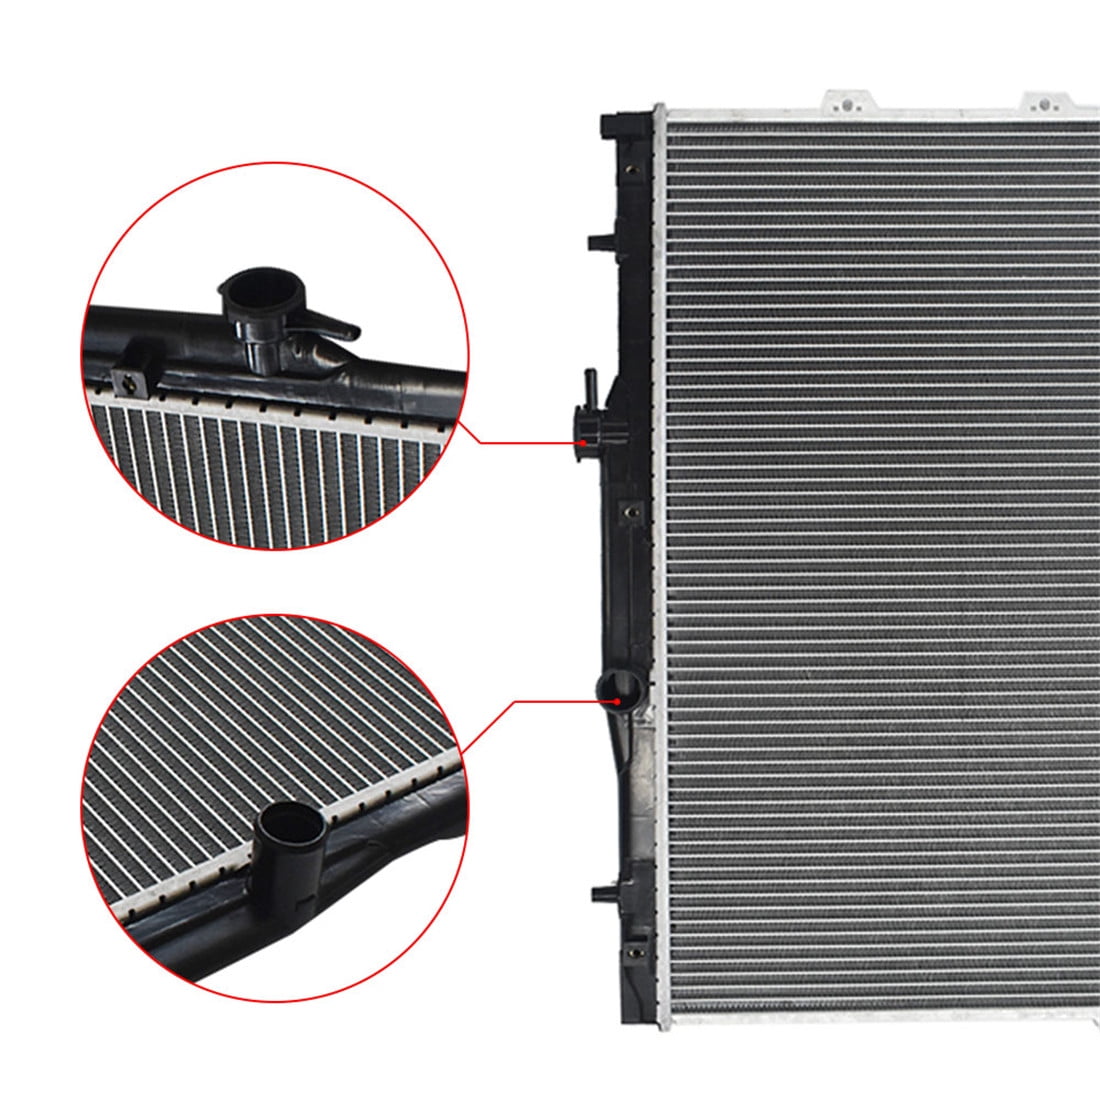 labwork Replacement Radiator 2784 Fit for 2004-2009 Kia Spectra Spectra5 L4 1.8L 2.0L 